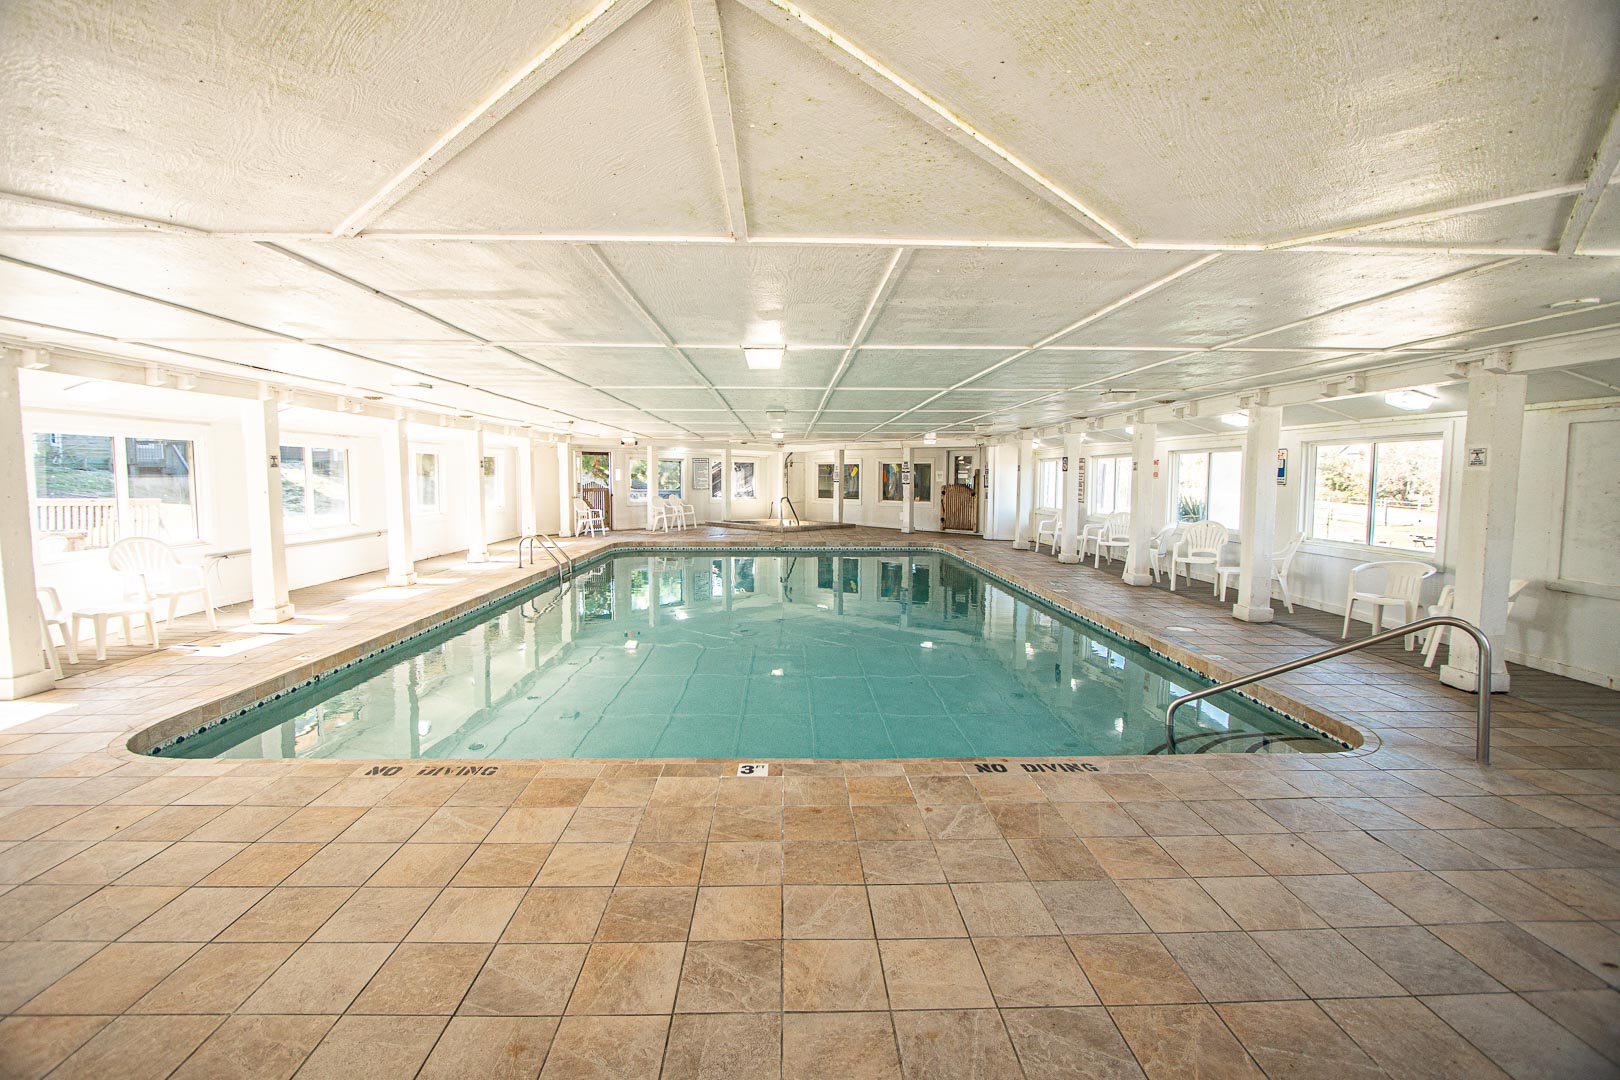 An expansive indoor swimming pool at VRI's Barrier Island Station in North Carolina.